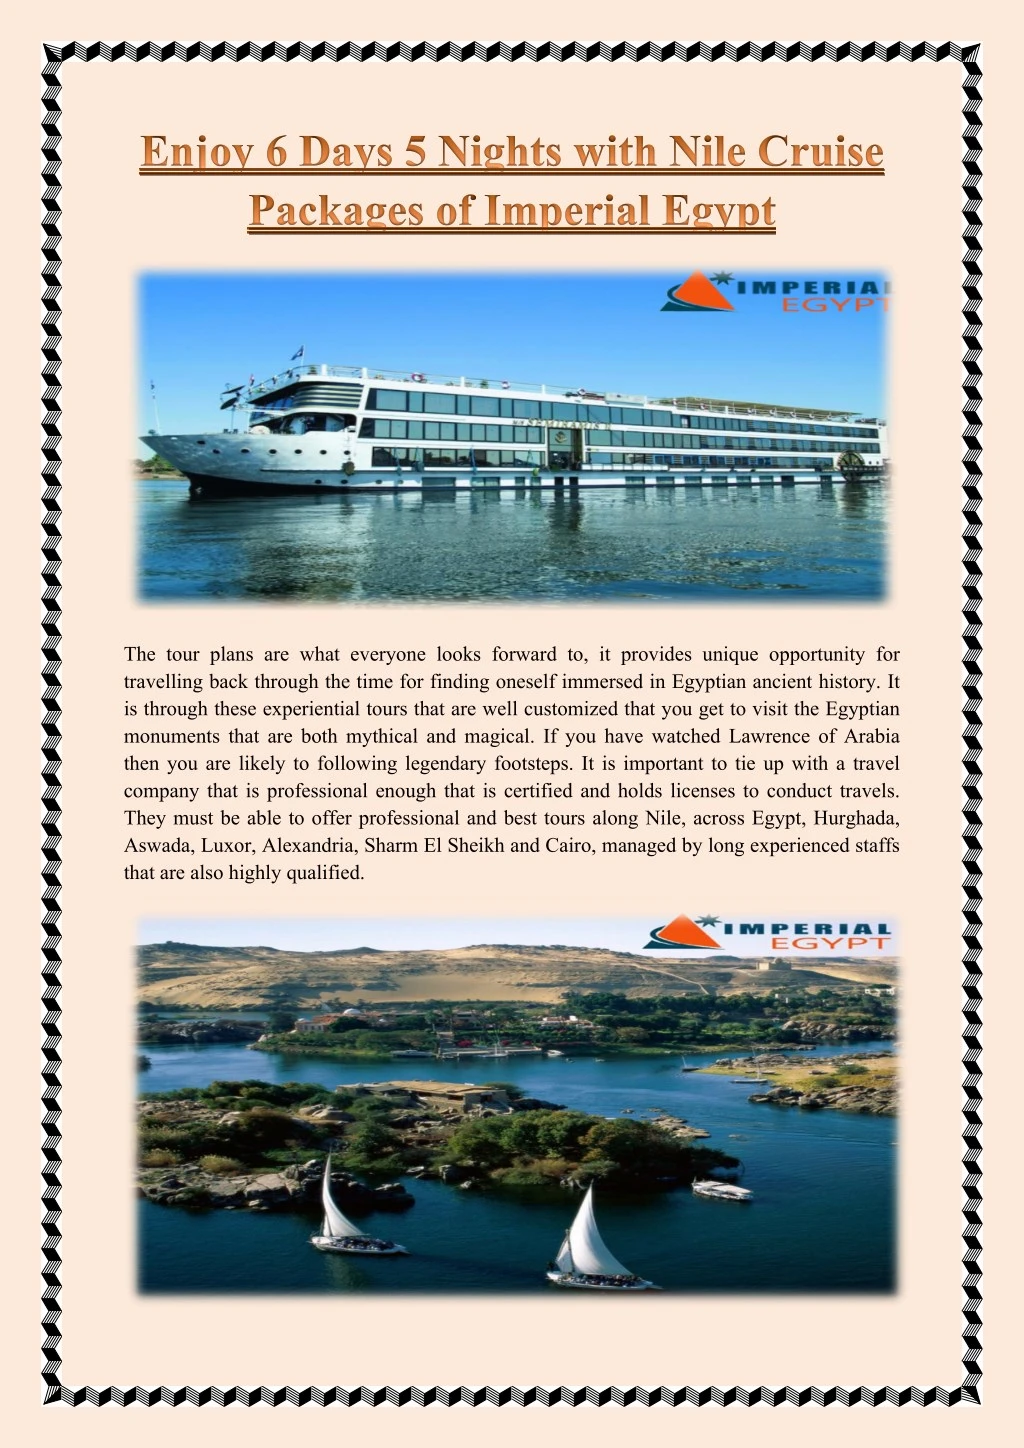 enjoy 6 days 5 nights with nile cruise packages